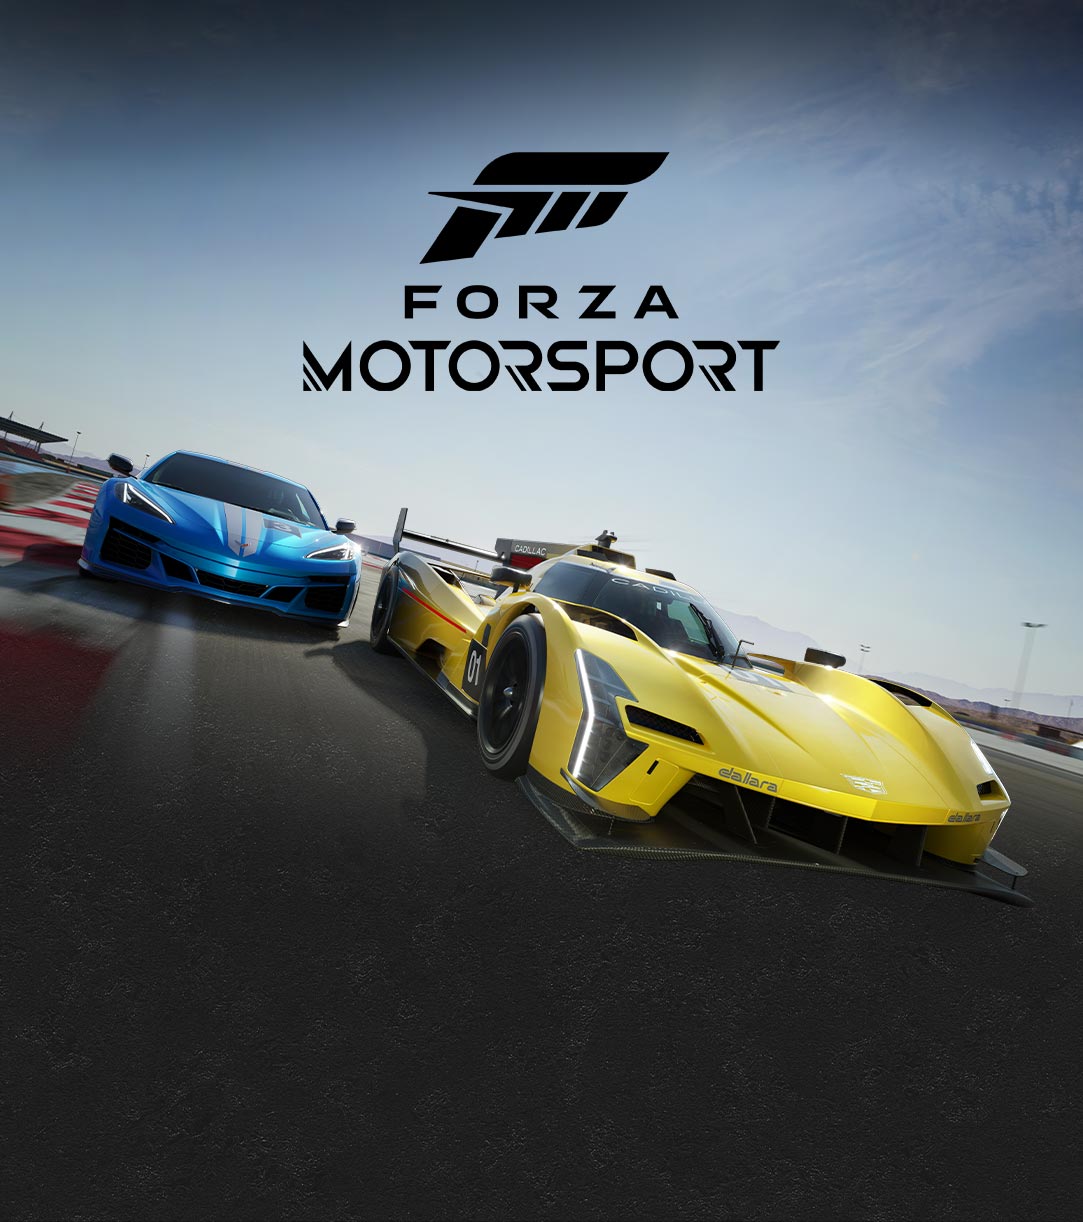 Forza Motorsport: Available Now on Console, PC, and Game Pass | Xbox